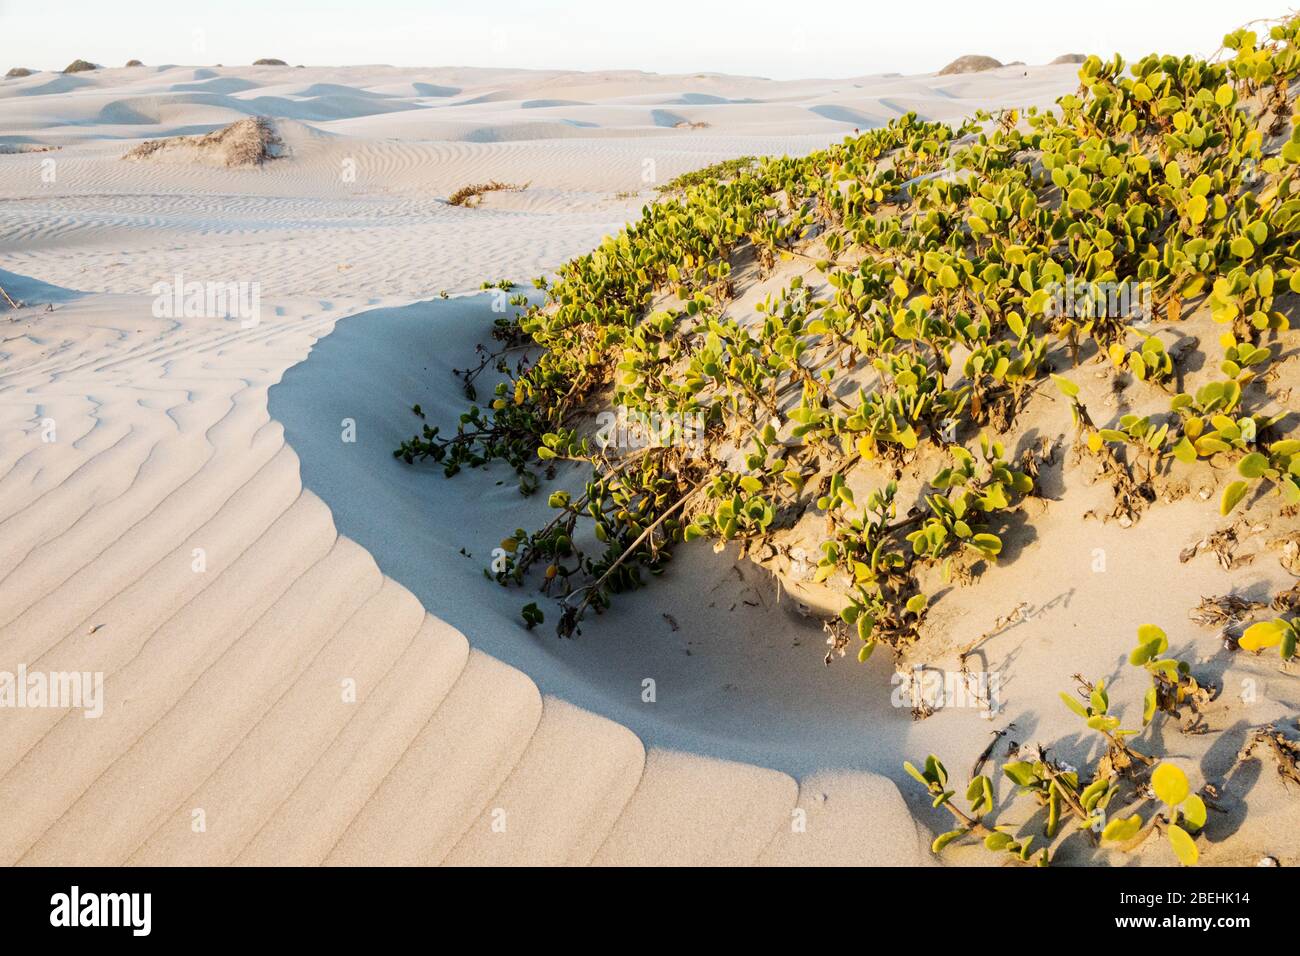 Patterns in the dunes at Sand Dollar Beach, Magdalena Island, Baja California Sur, Mexico. Stock Photo